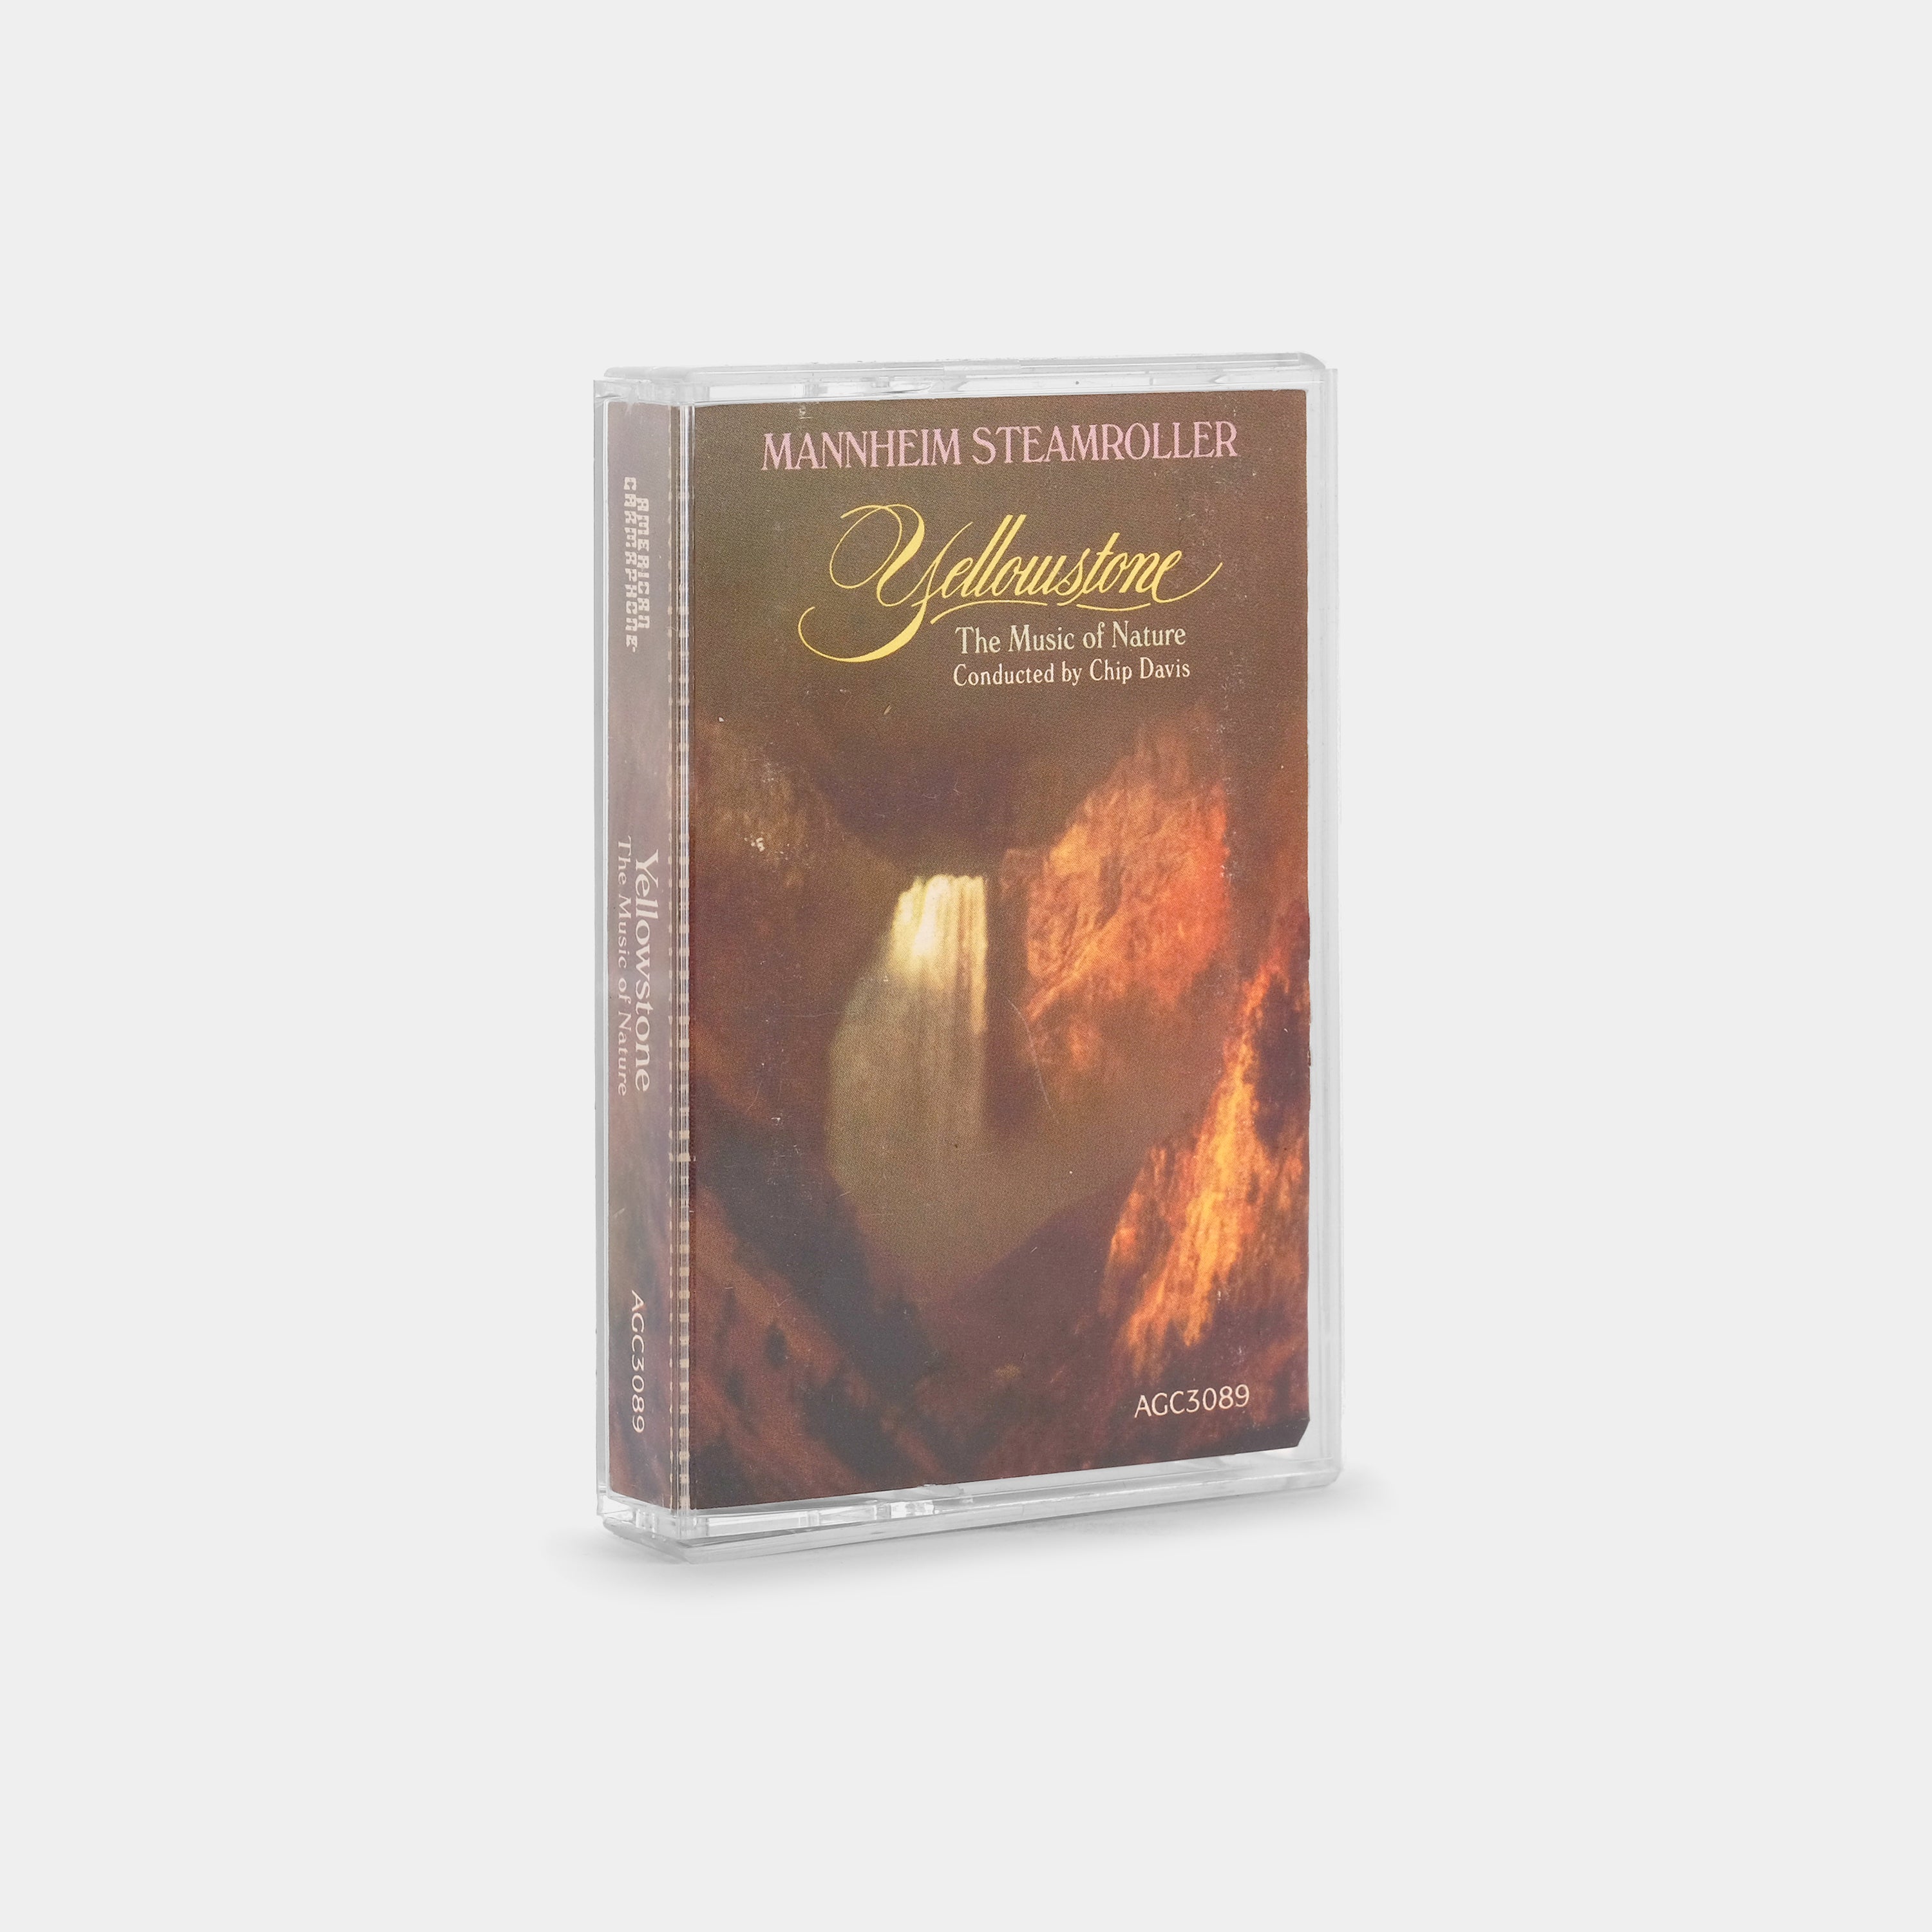 Mannheim Steamroller - Yellowstone: The Music Of Nature Cassette Tape